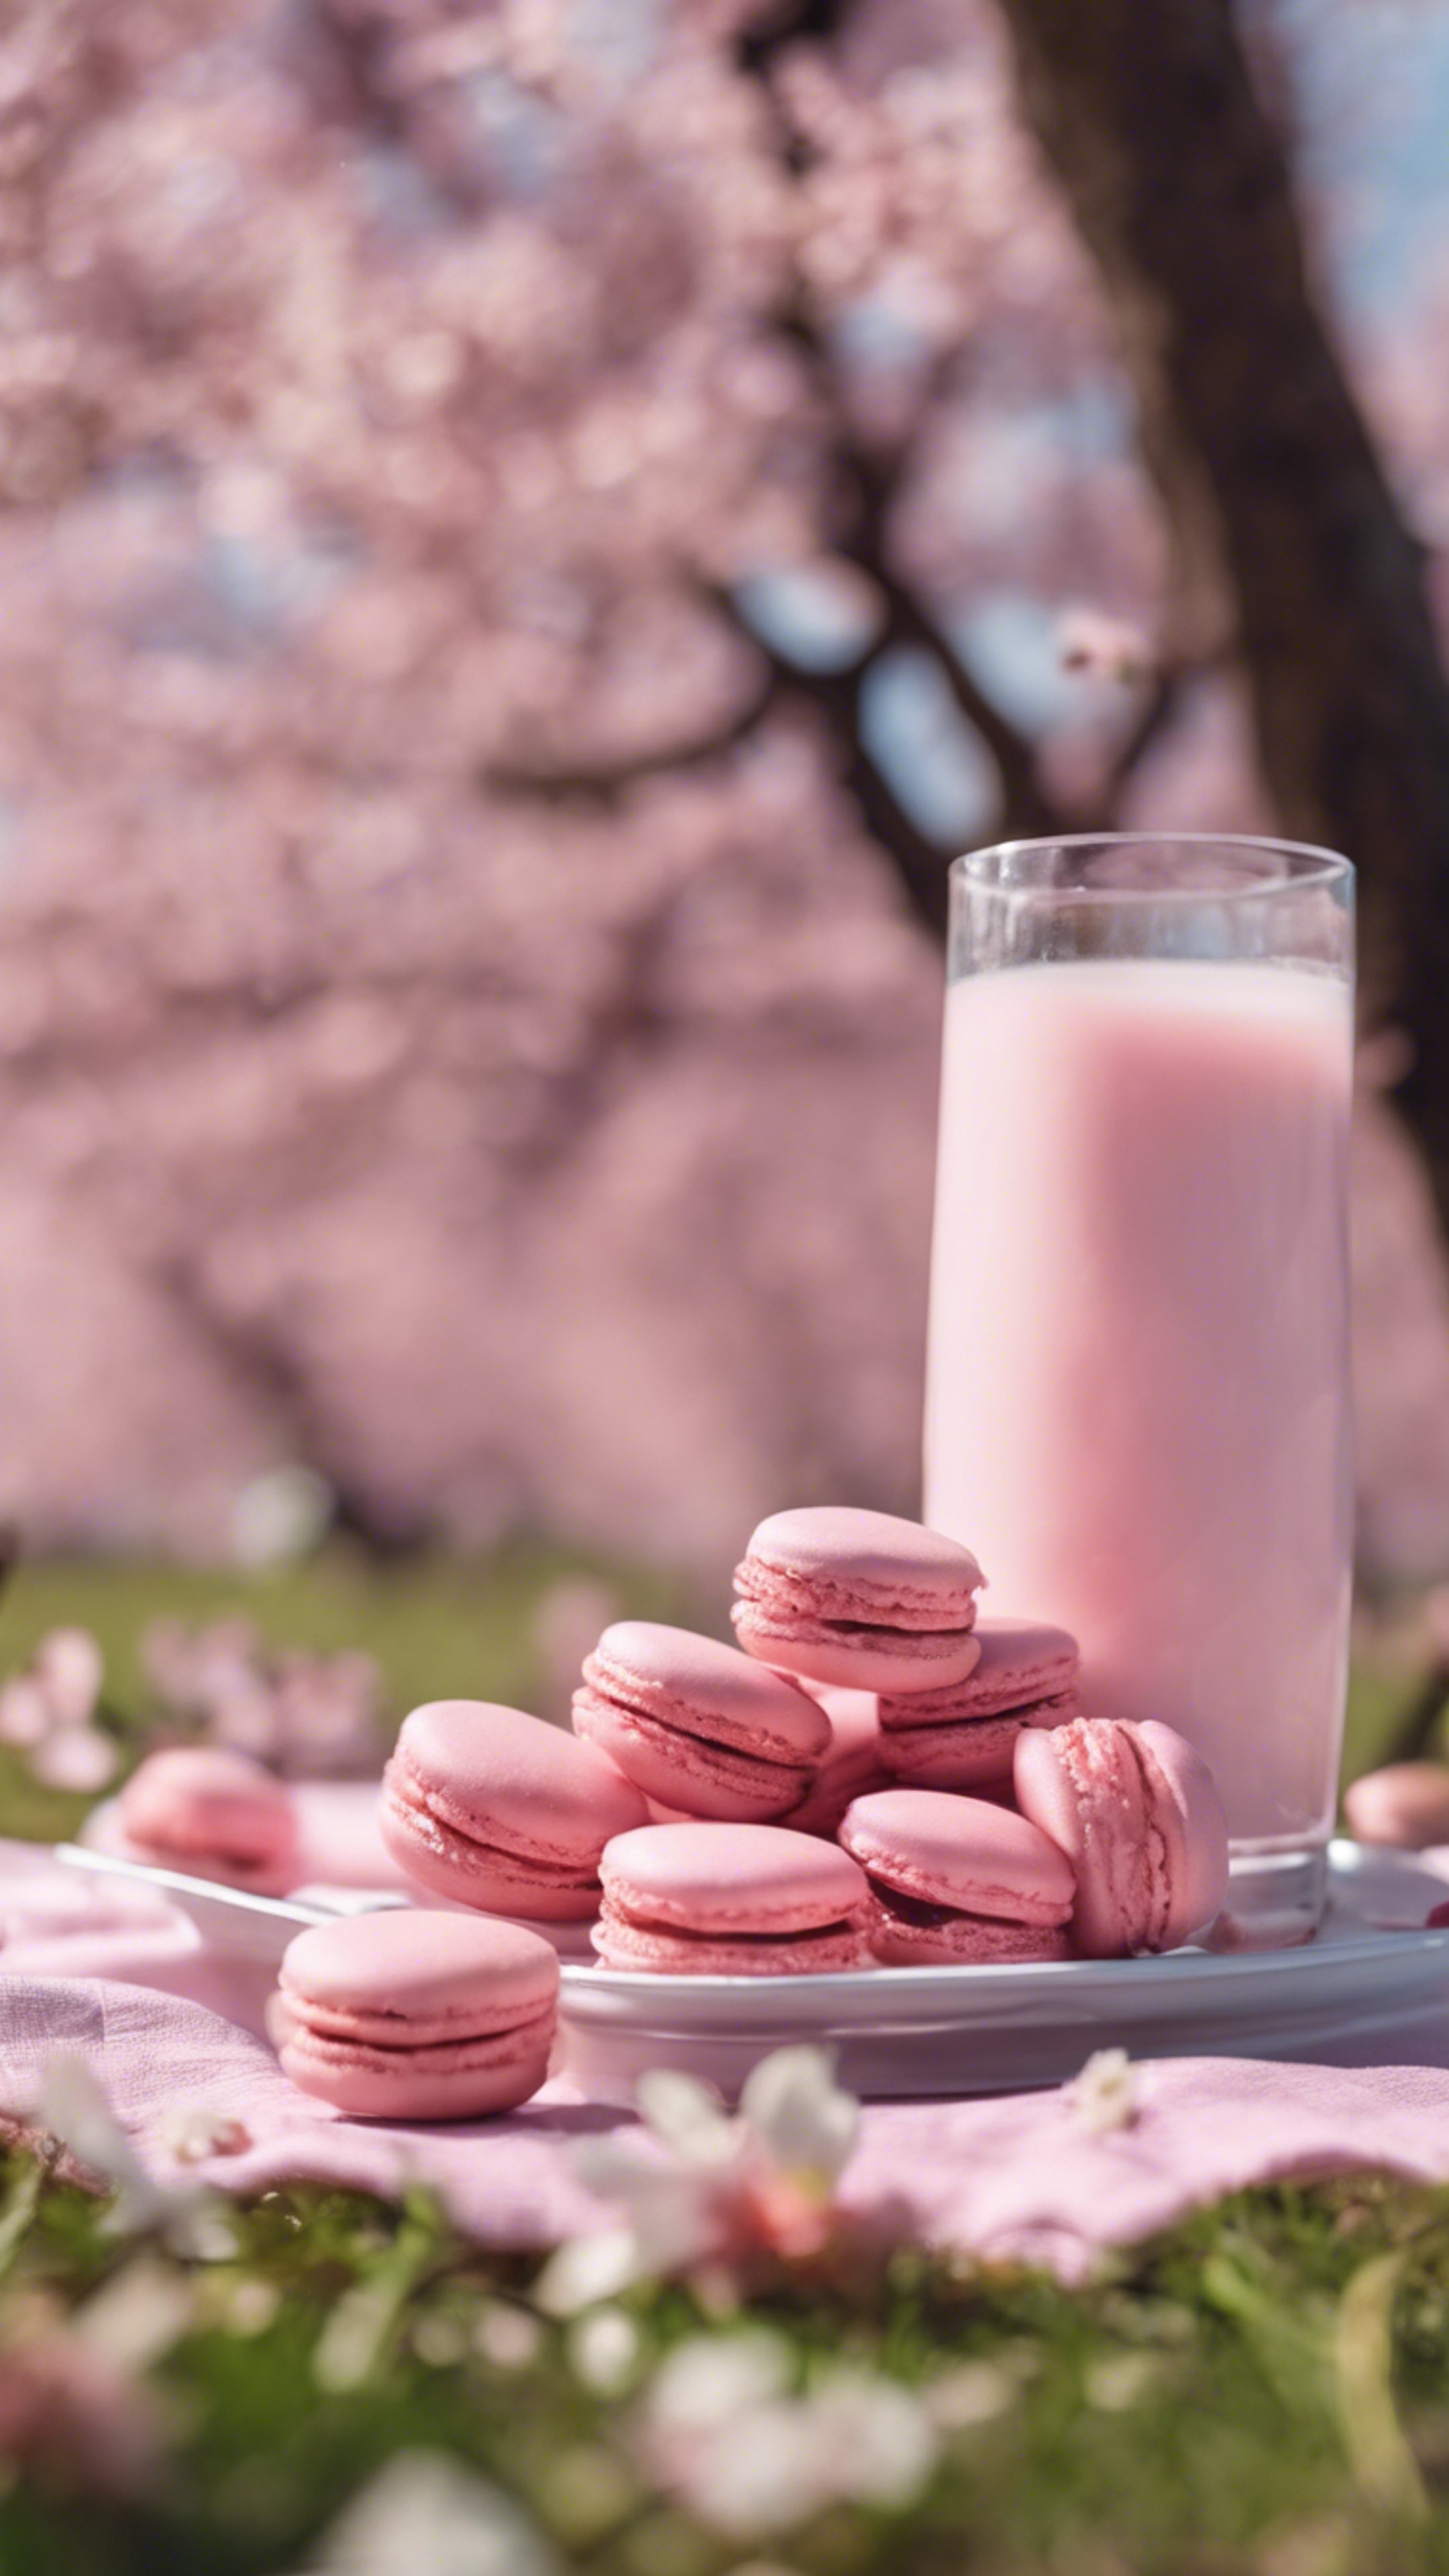 A picnic under the cherry blossoms with pink macaroons and strawberry milk. 墙纸[97540e72ef6b46bcbaa8]